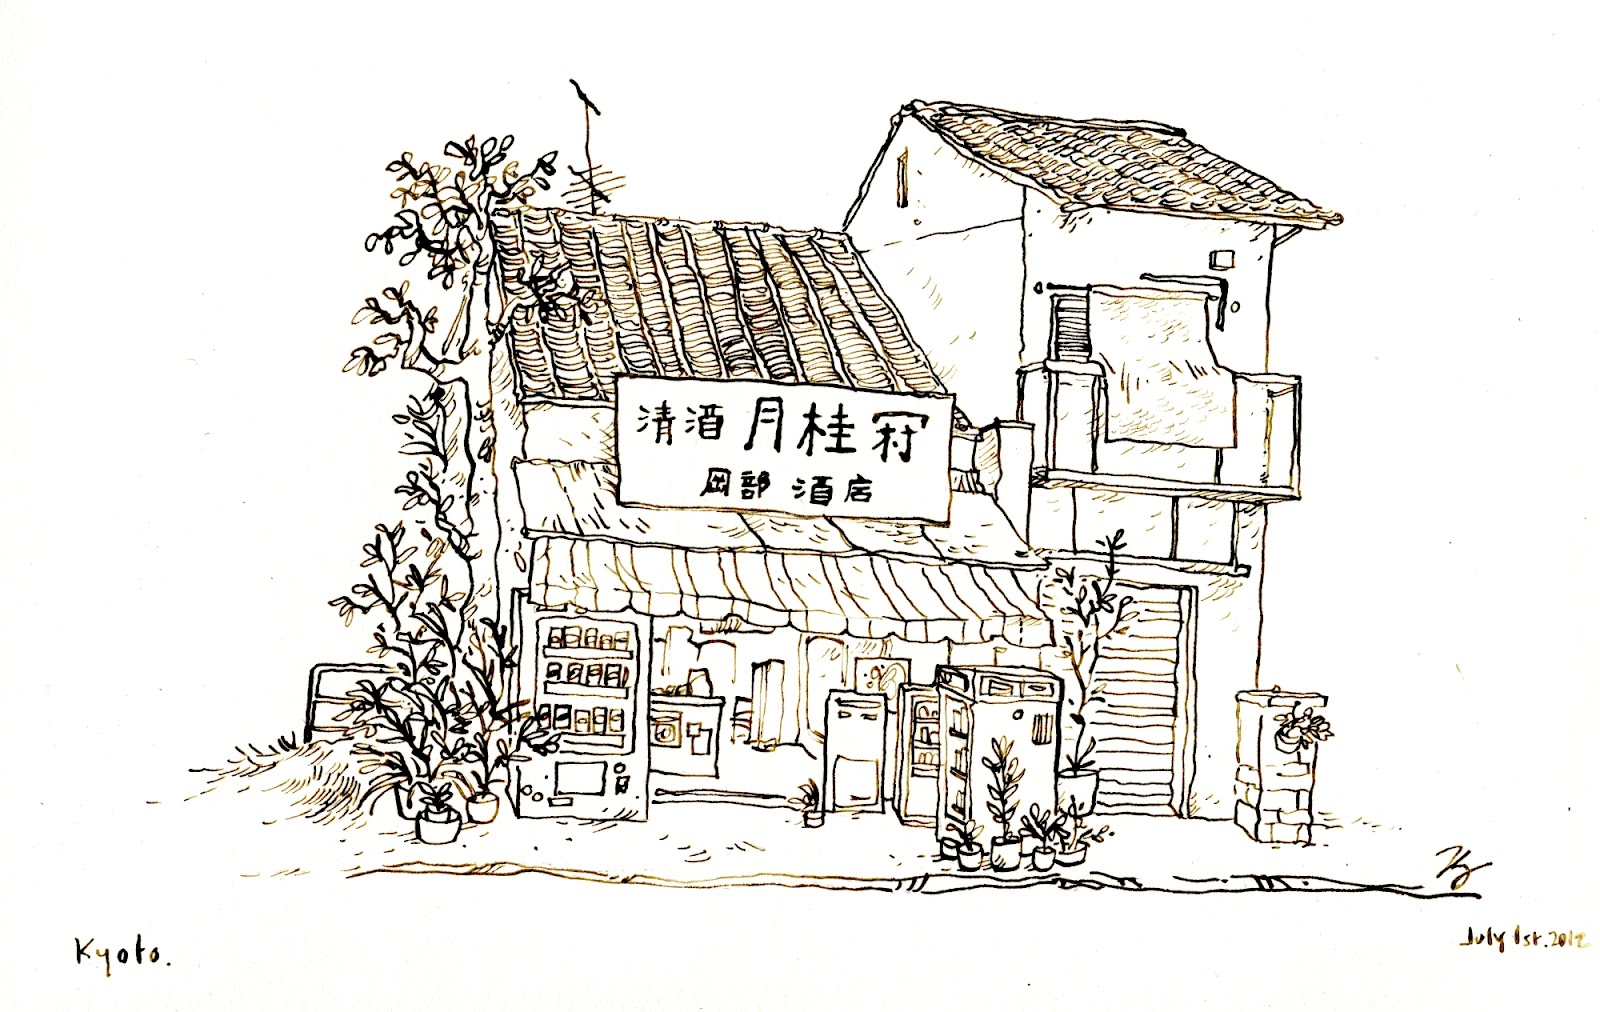 QinLeng: Sketches from my trip to Japan last May~how I miss Kyoto!